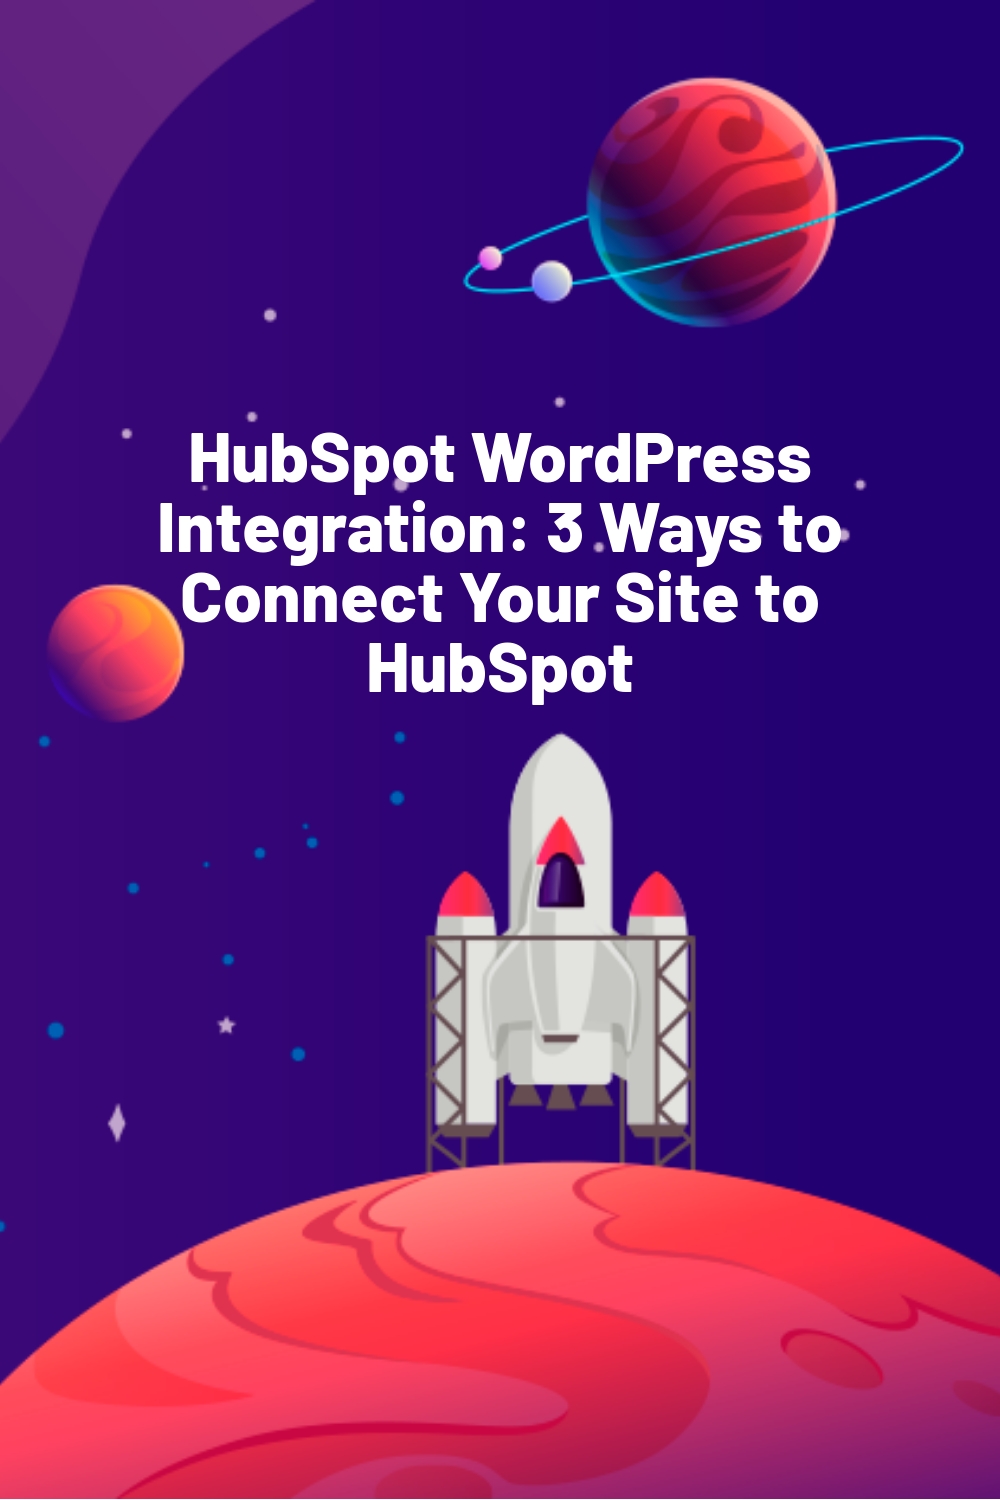 HubSpot WordPress Integration: 3 Ways to Connect Your Site to HubSpot